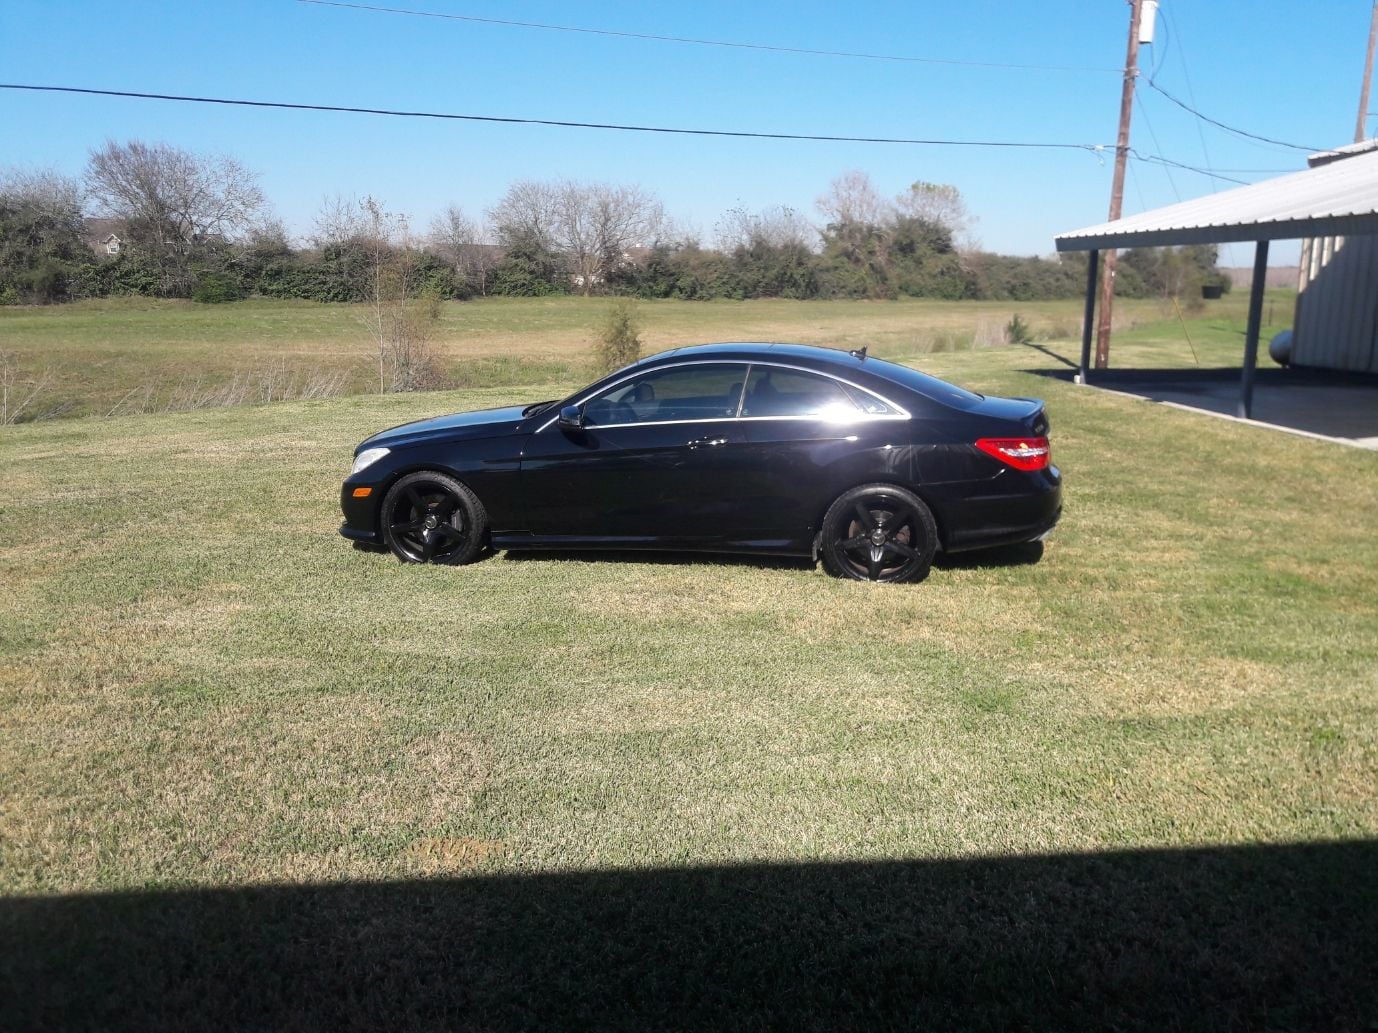 2010 Mercedes-Benz E550 - 2010 e550 coupe, 42,000 miles, all black - Used - VIN WDDKJCB4AF032546? - 44,000 Miles - 8 cyl - 2WD - Automatic - Coupe - Black - Santa Fe, TX 77510, United States